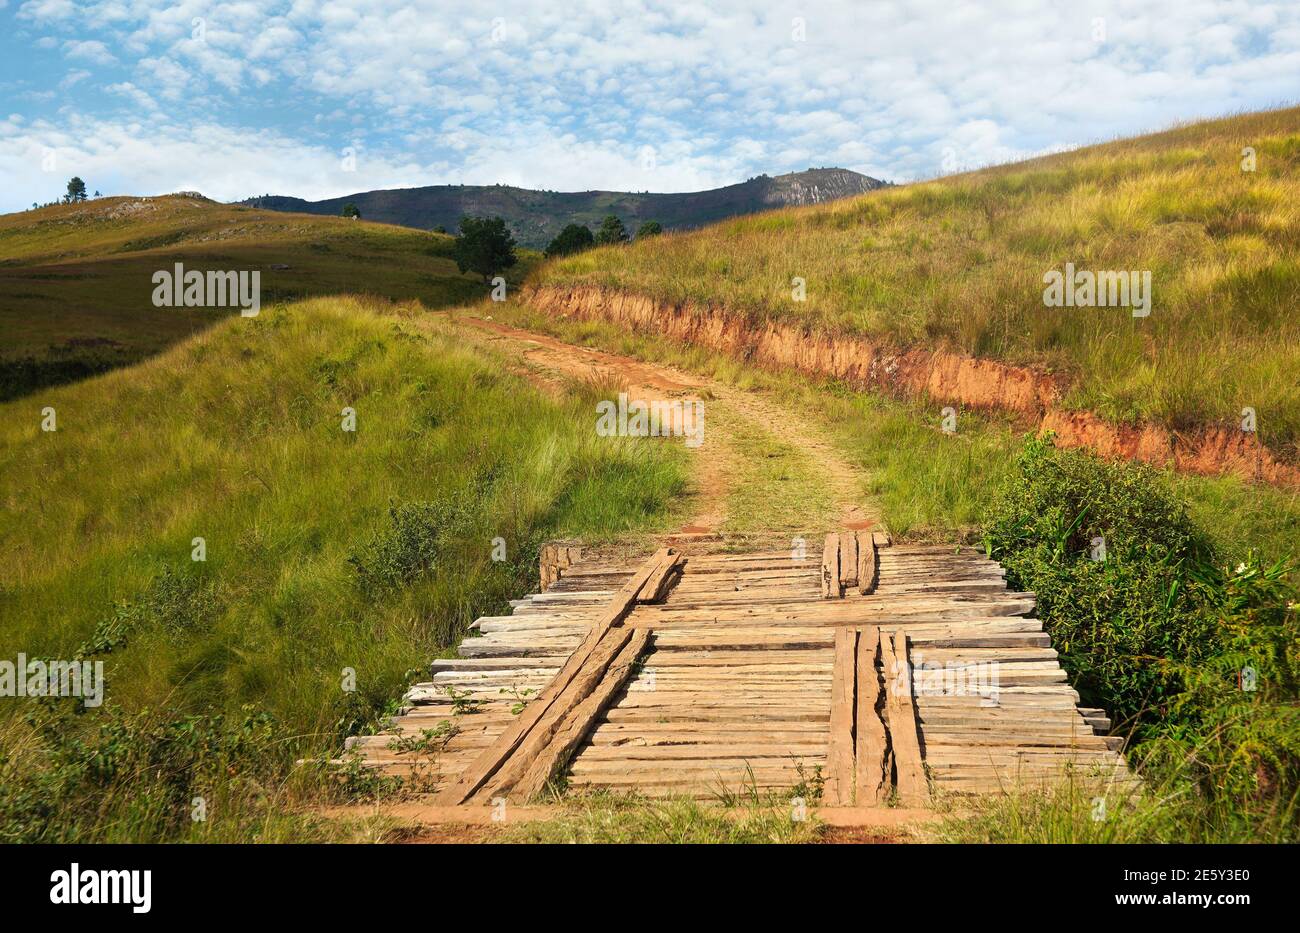 Bridge made of wooden bars on country road, grass growing on hills both sides - typical view when driving 4wd off road vehicle near Andringitra park, Stock Photo